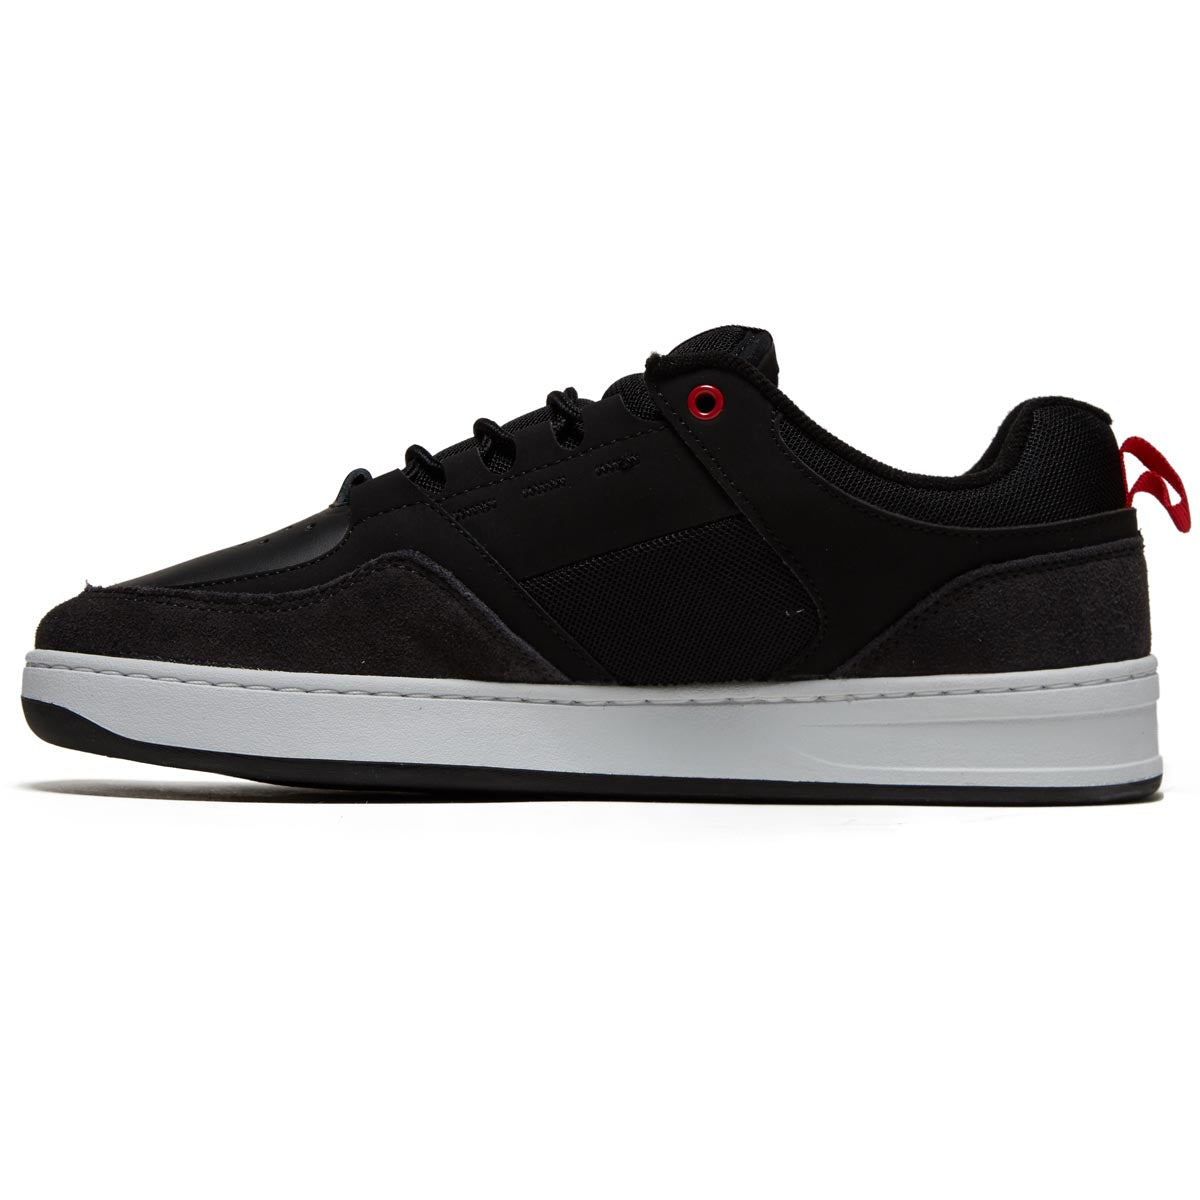 Fallen The Crest Shoes - Black/Gray/Red image 2